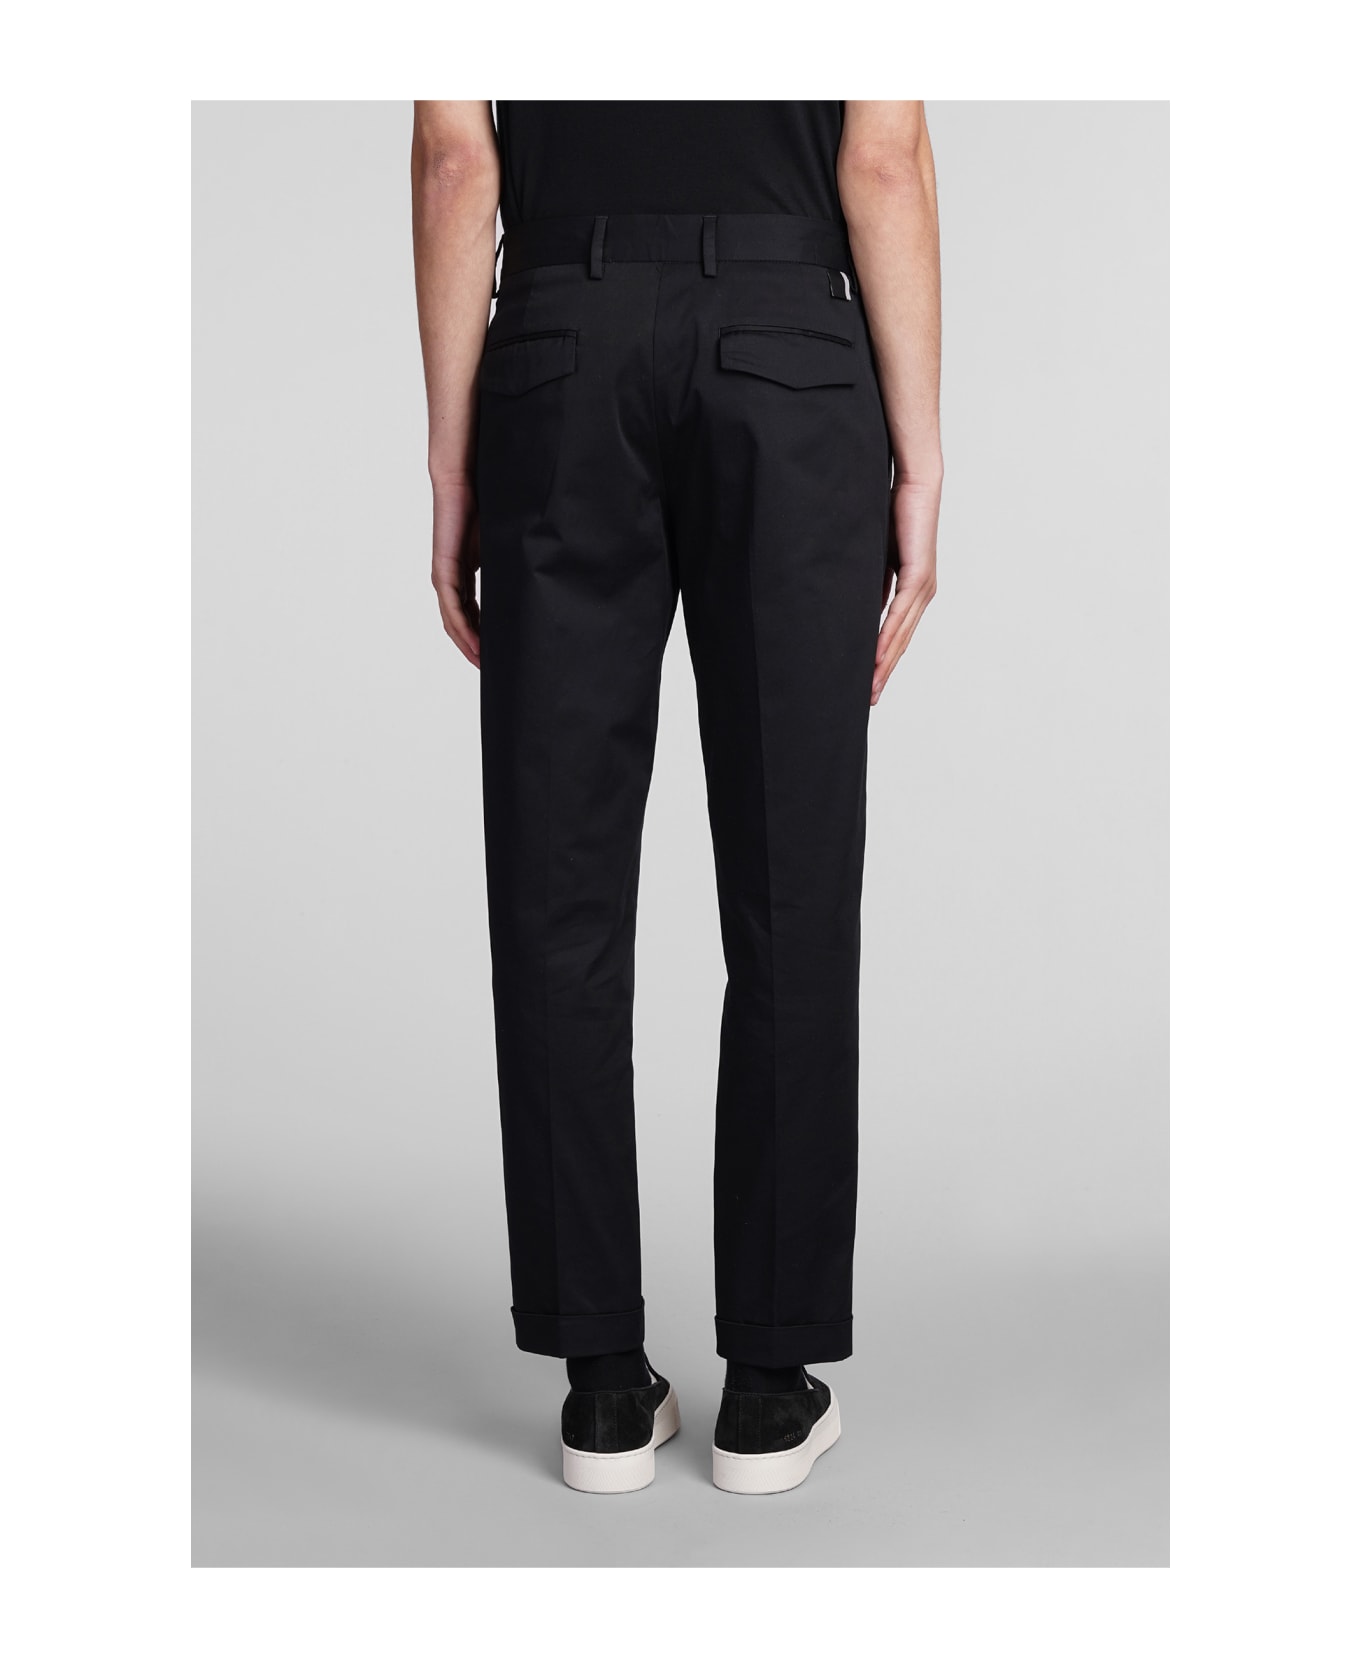 Low Brand Oyster Pants In Black Cotton - black